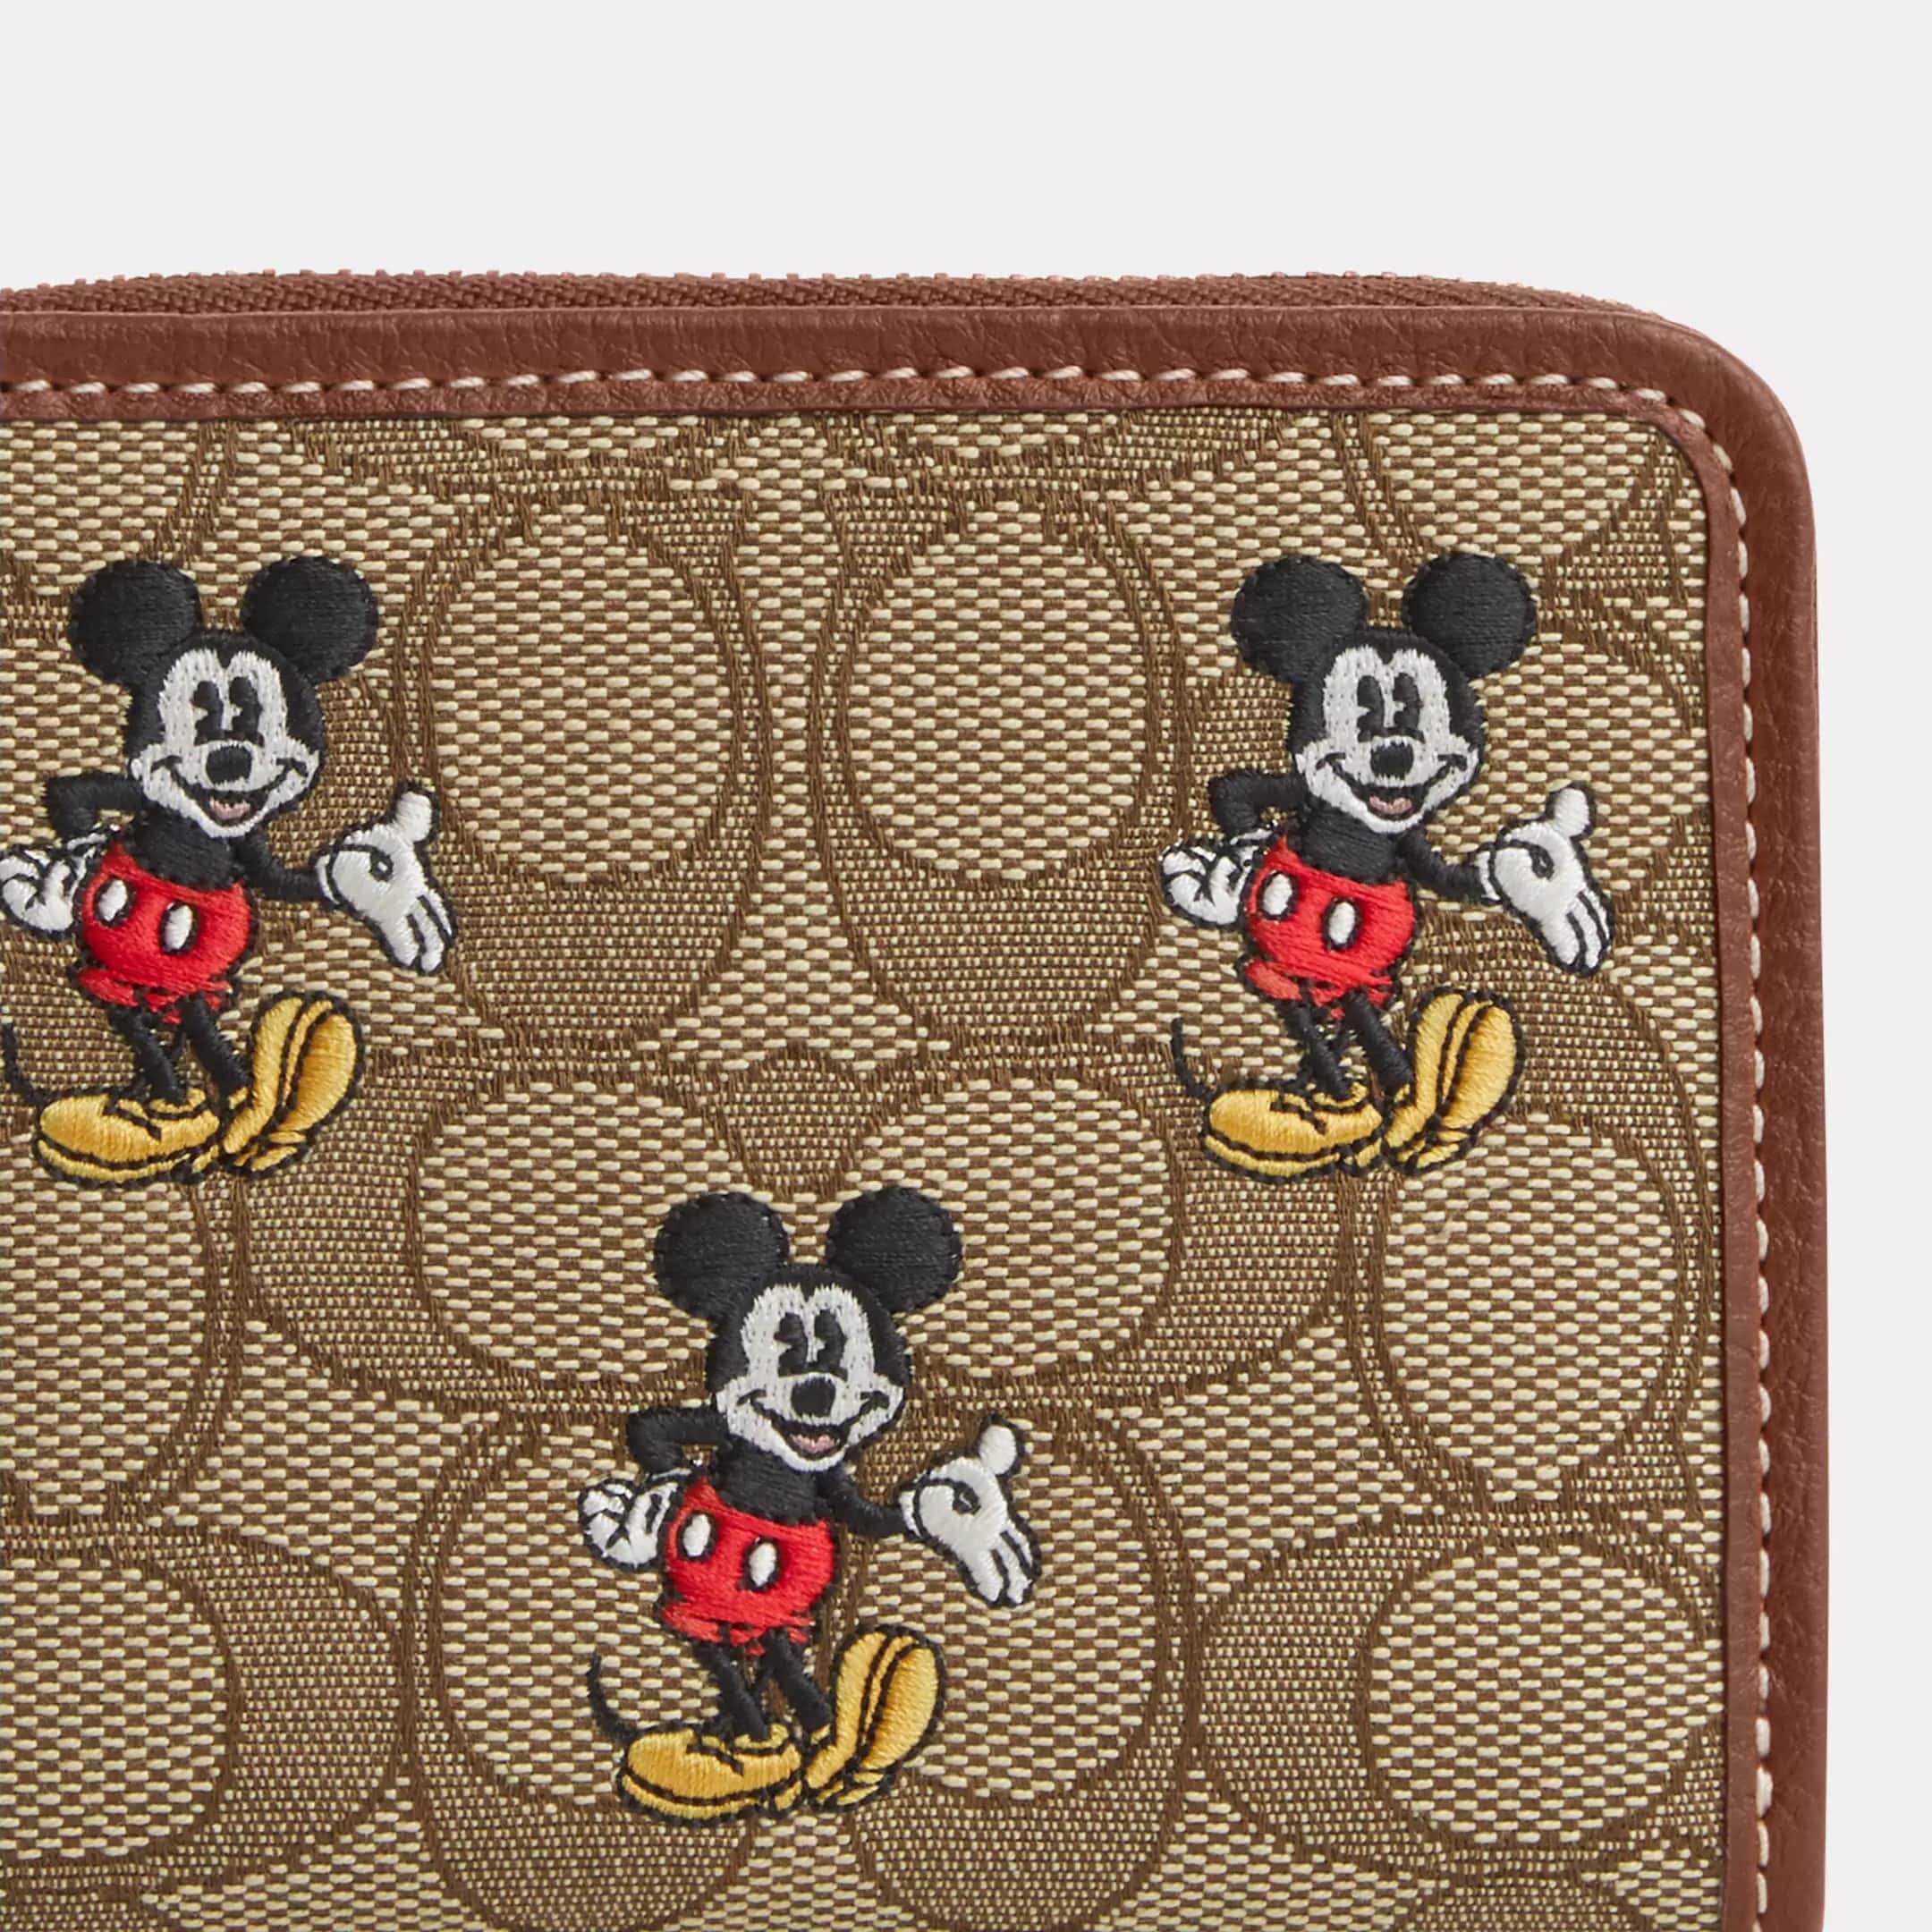 VÍ NGẮN NỮ CẦM TAY DISNEY X COACH SMALL ZIP AROUND WALLET IN SIGNATURE JACQUARD WITH MICKEY MOUSE PRINT CN035 3